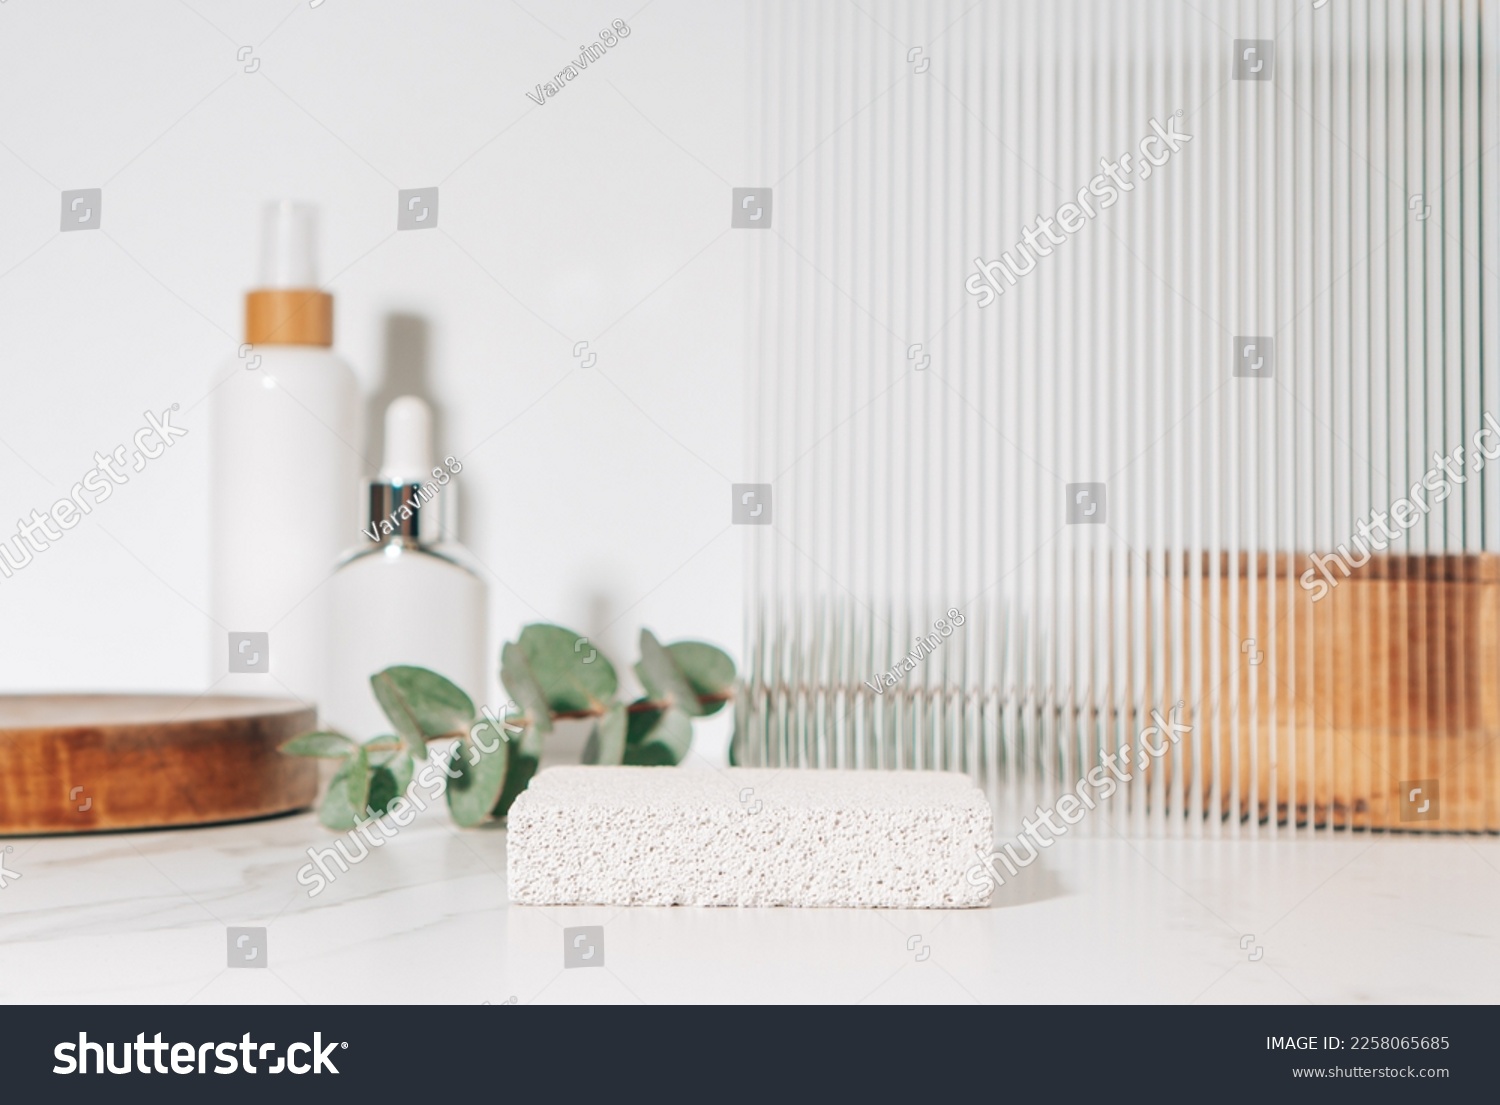 Spa and beauty product presentation scene made with porous stone podium near the cosmetic tubes and accessories on white bathroom shelf. #2258065685